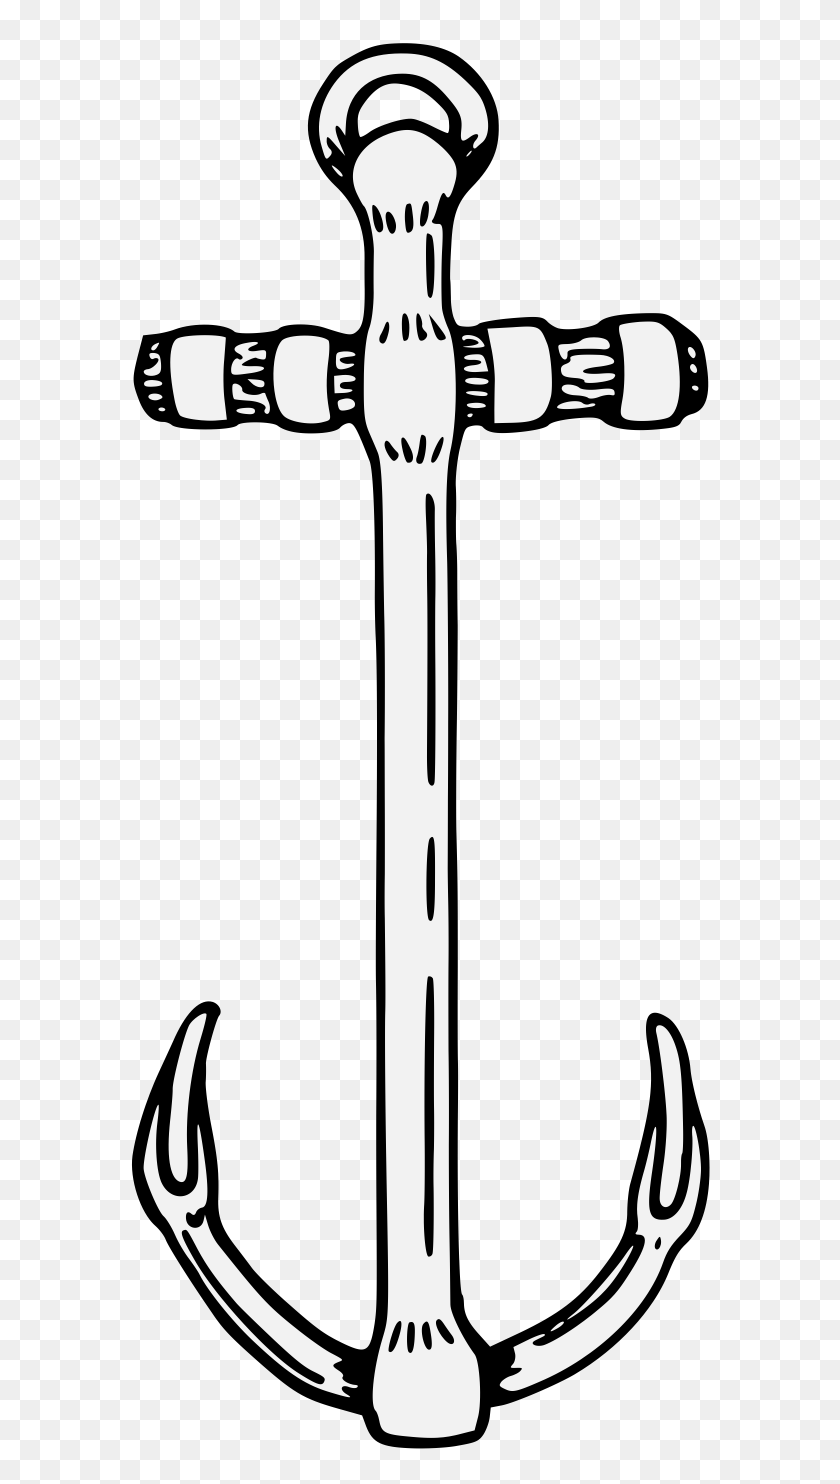 599x1424 Anchor - Anchor Clipart Black And White